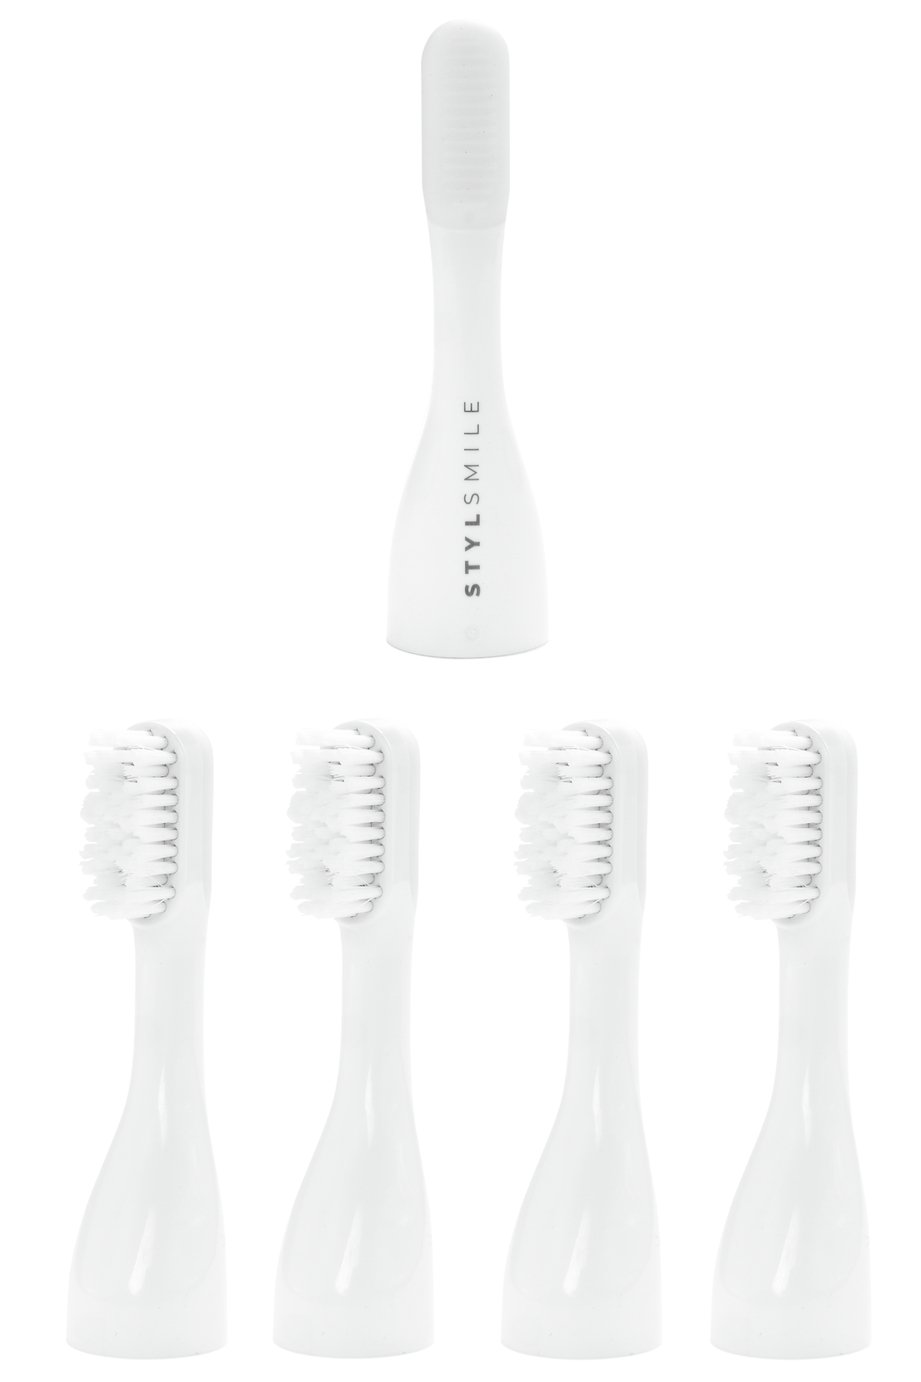 STYLSMILE Replacement Standard Heads x4